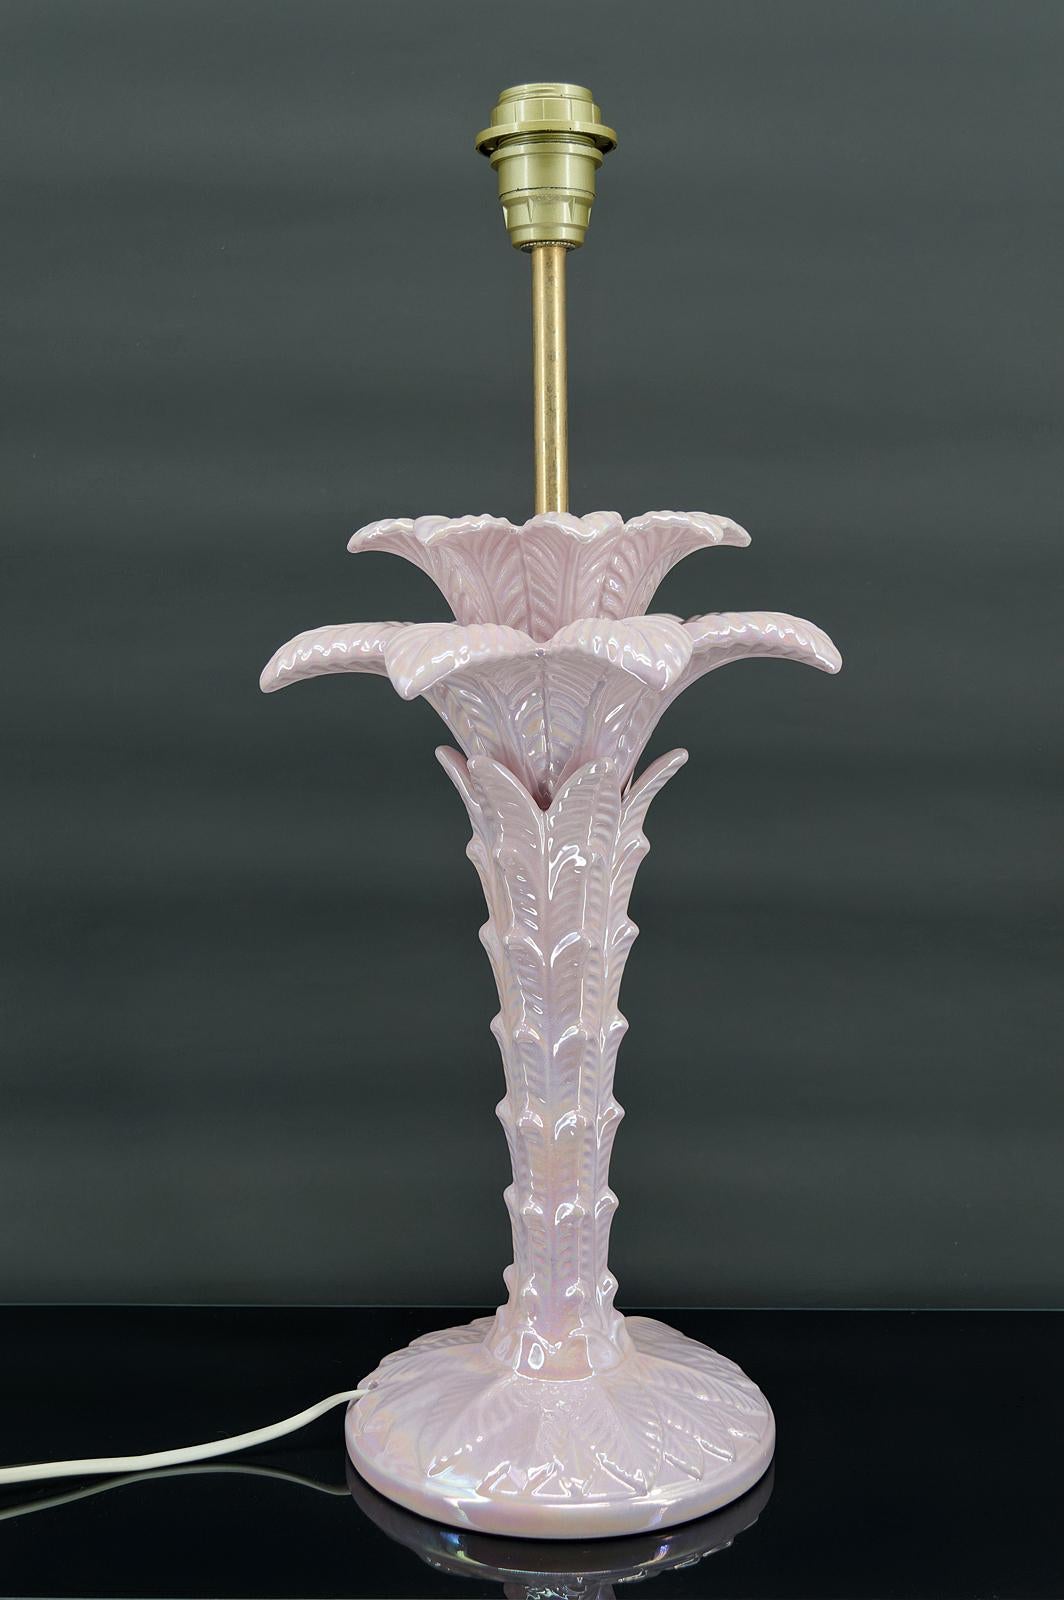 Superb Palm tree lamp in pearly pink ceramic.

Italy, circa 1960

Hollywood Regency style.

In excellent condition, electricity OK.

Dimensions:
height 58 cm
diameter 28 cm

